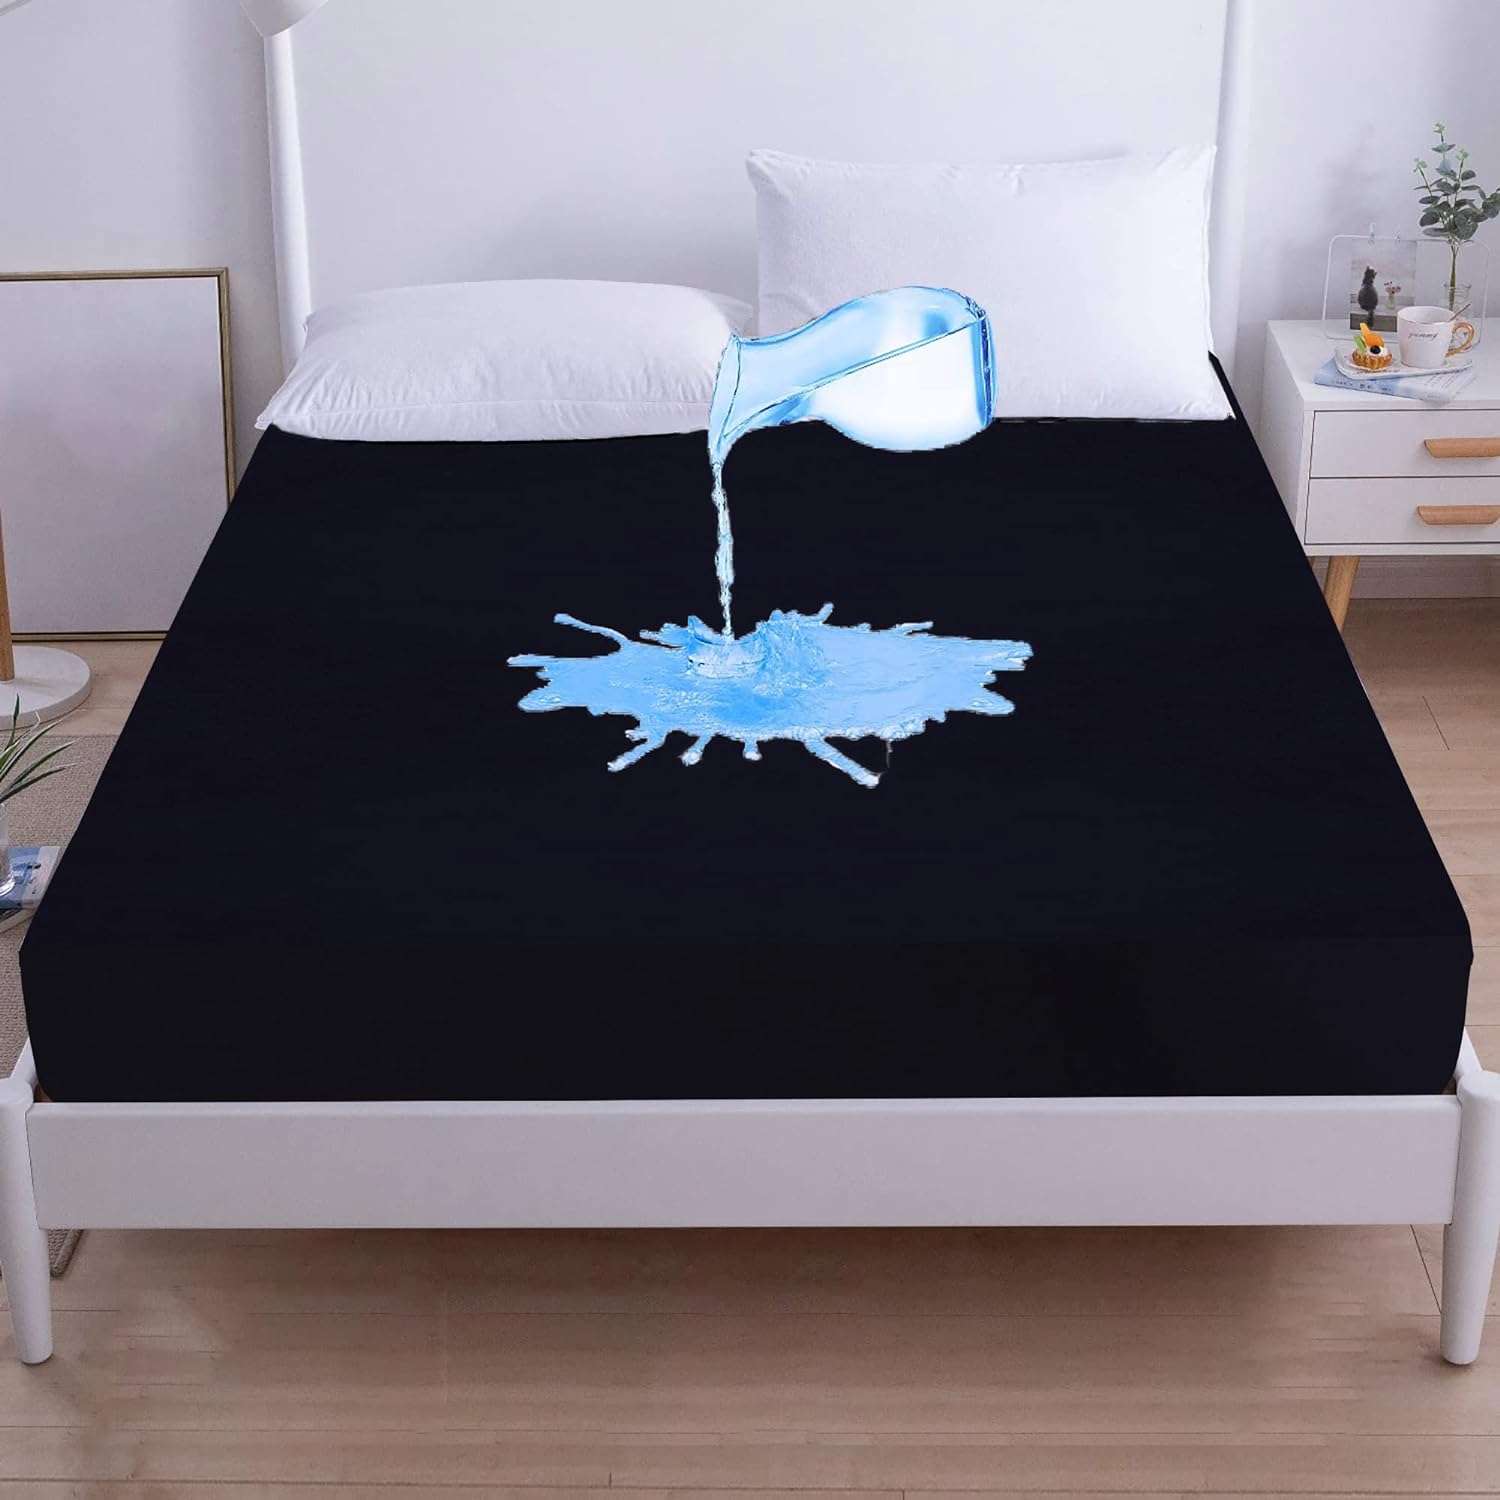 Single bed size mattress protector